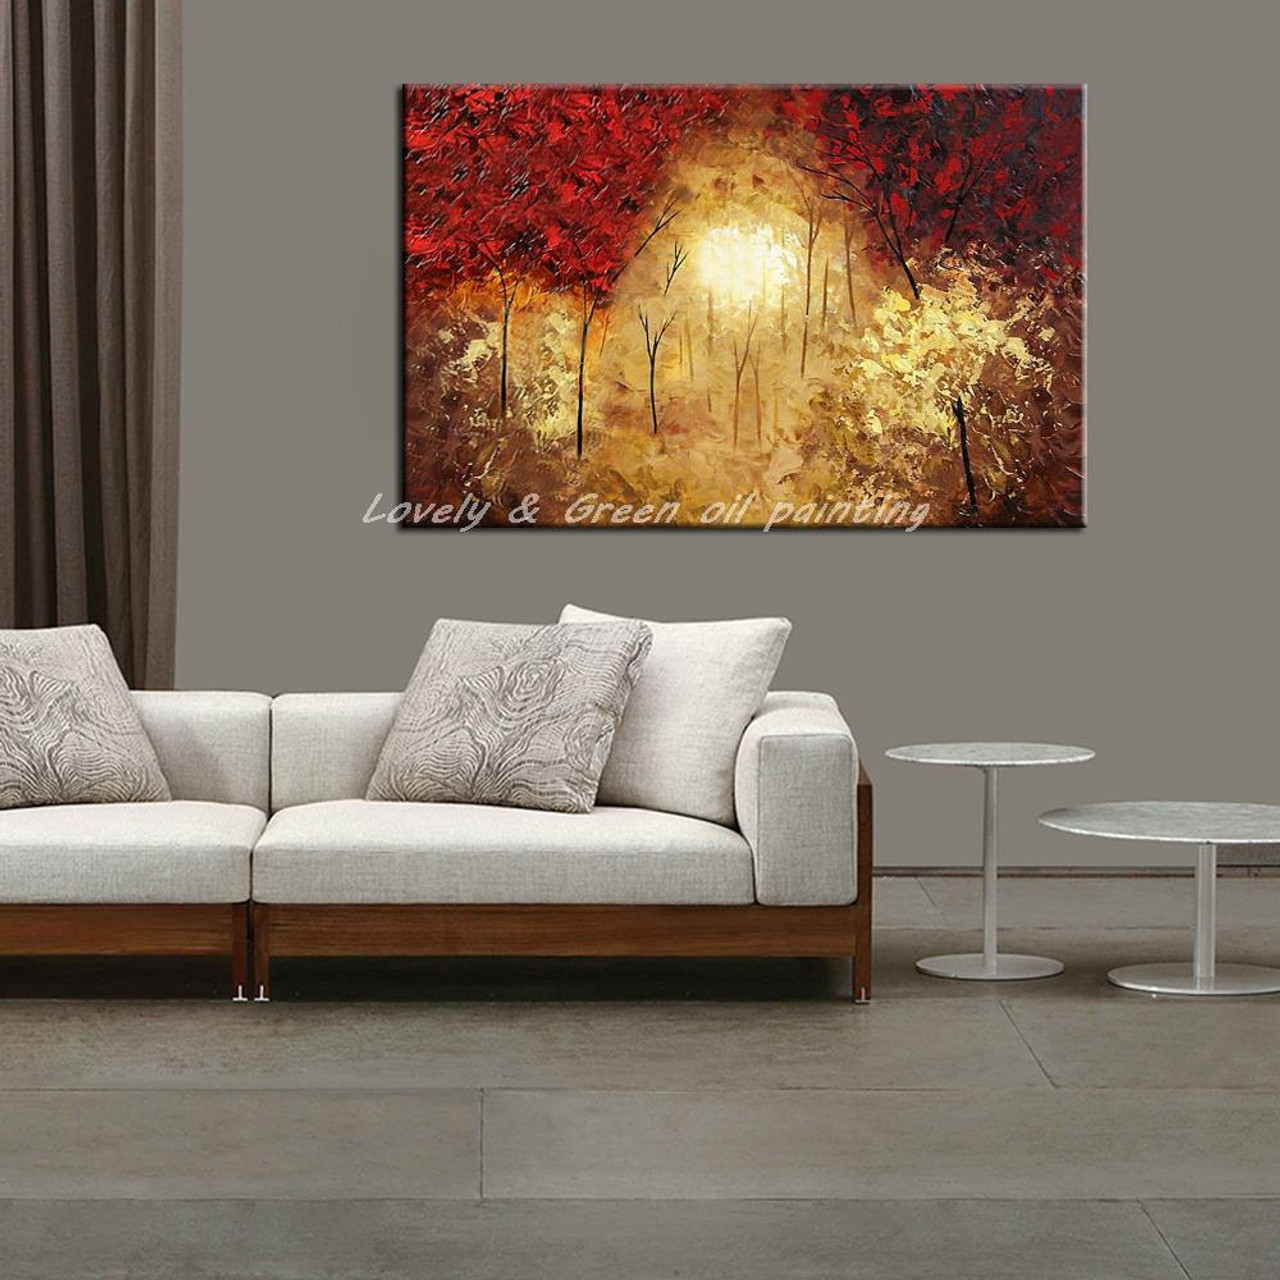 100 Hand Painted Modern Abstract Landscape Tree Oil Painting On Canvas Wall Art For Living Room Home Decoration Picture Gift OnshopDealsCom